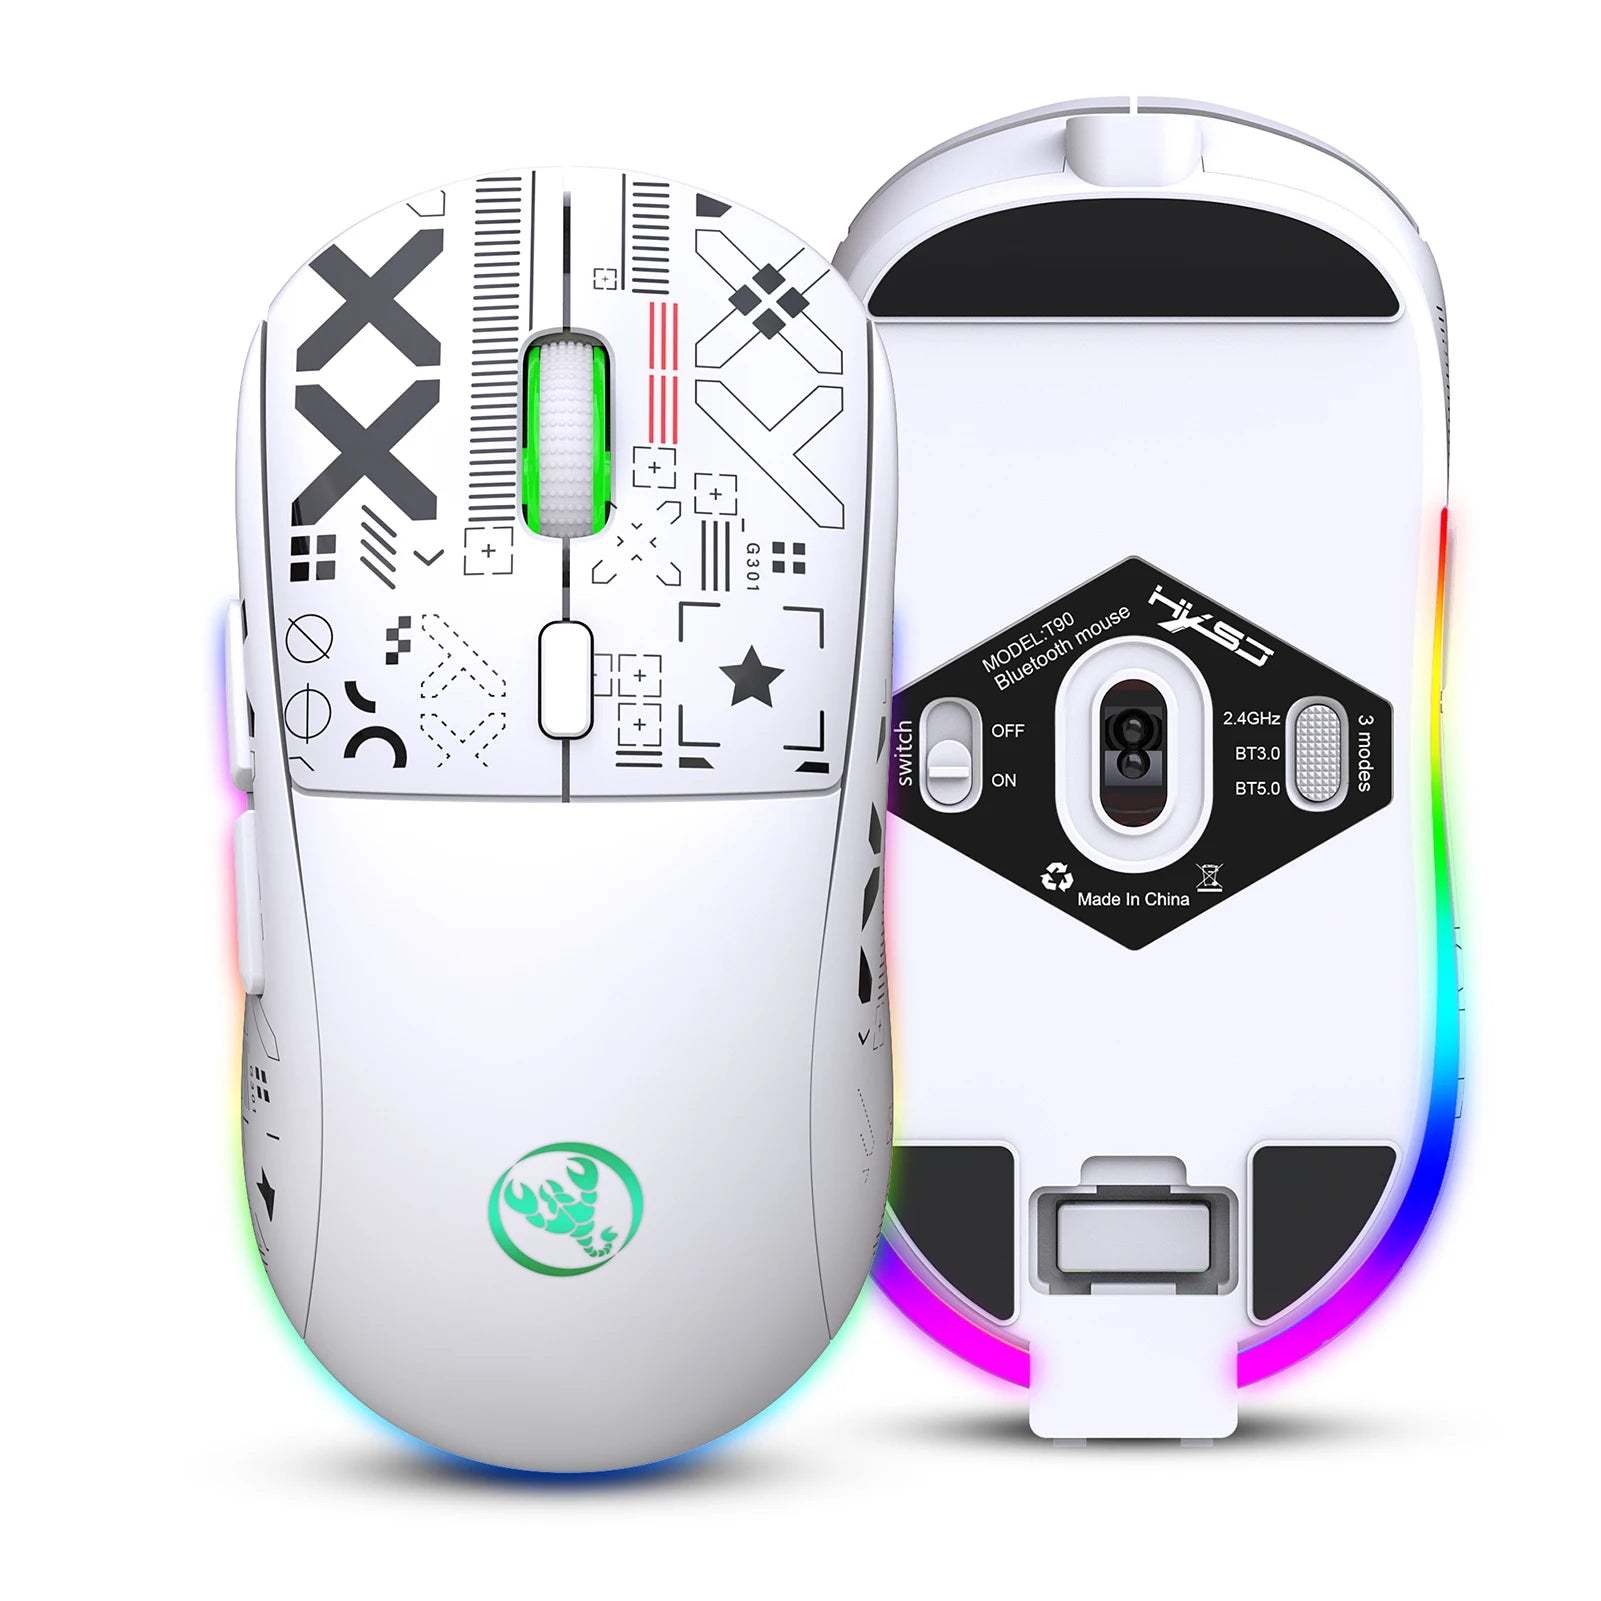 wireless gaming mouse, gaming mouse, wireless mouse, gaming mice, rechargeable mouse, mechanical mouse, razer mouse, wireless gaming mice, steelseries mouse